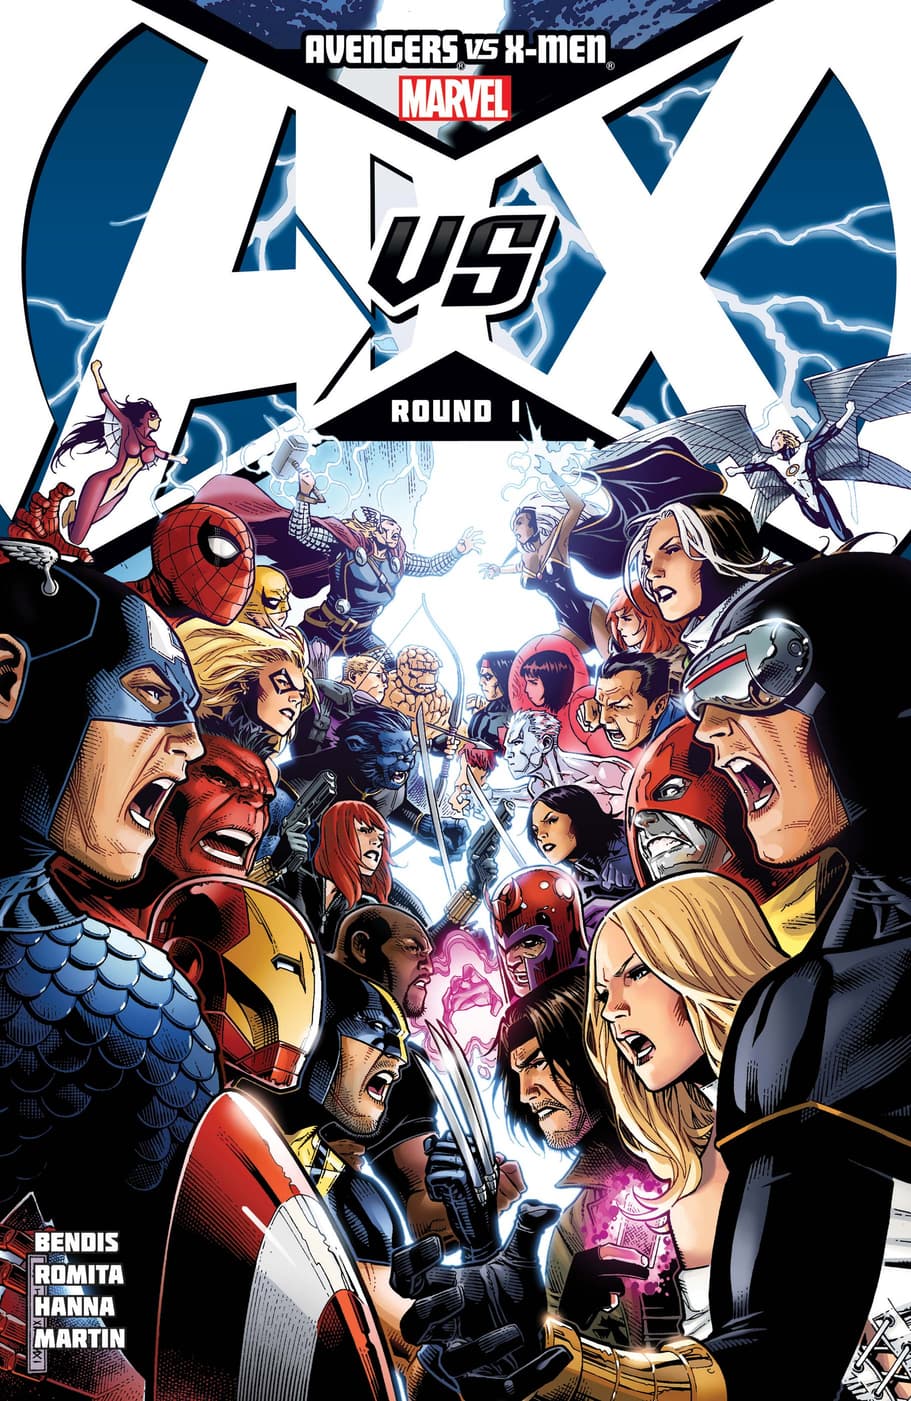 How Avengers Vs X Men Led To House Of X And Powers Of X Marvel